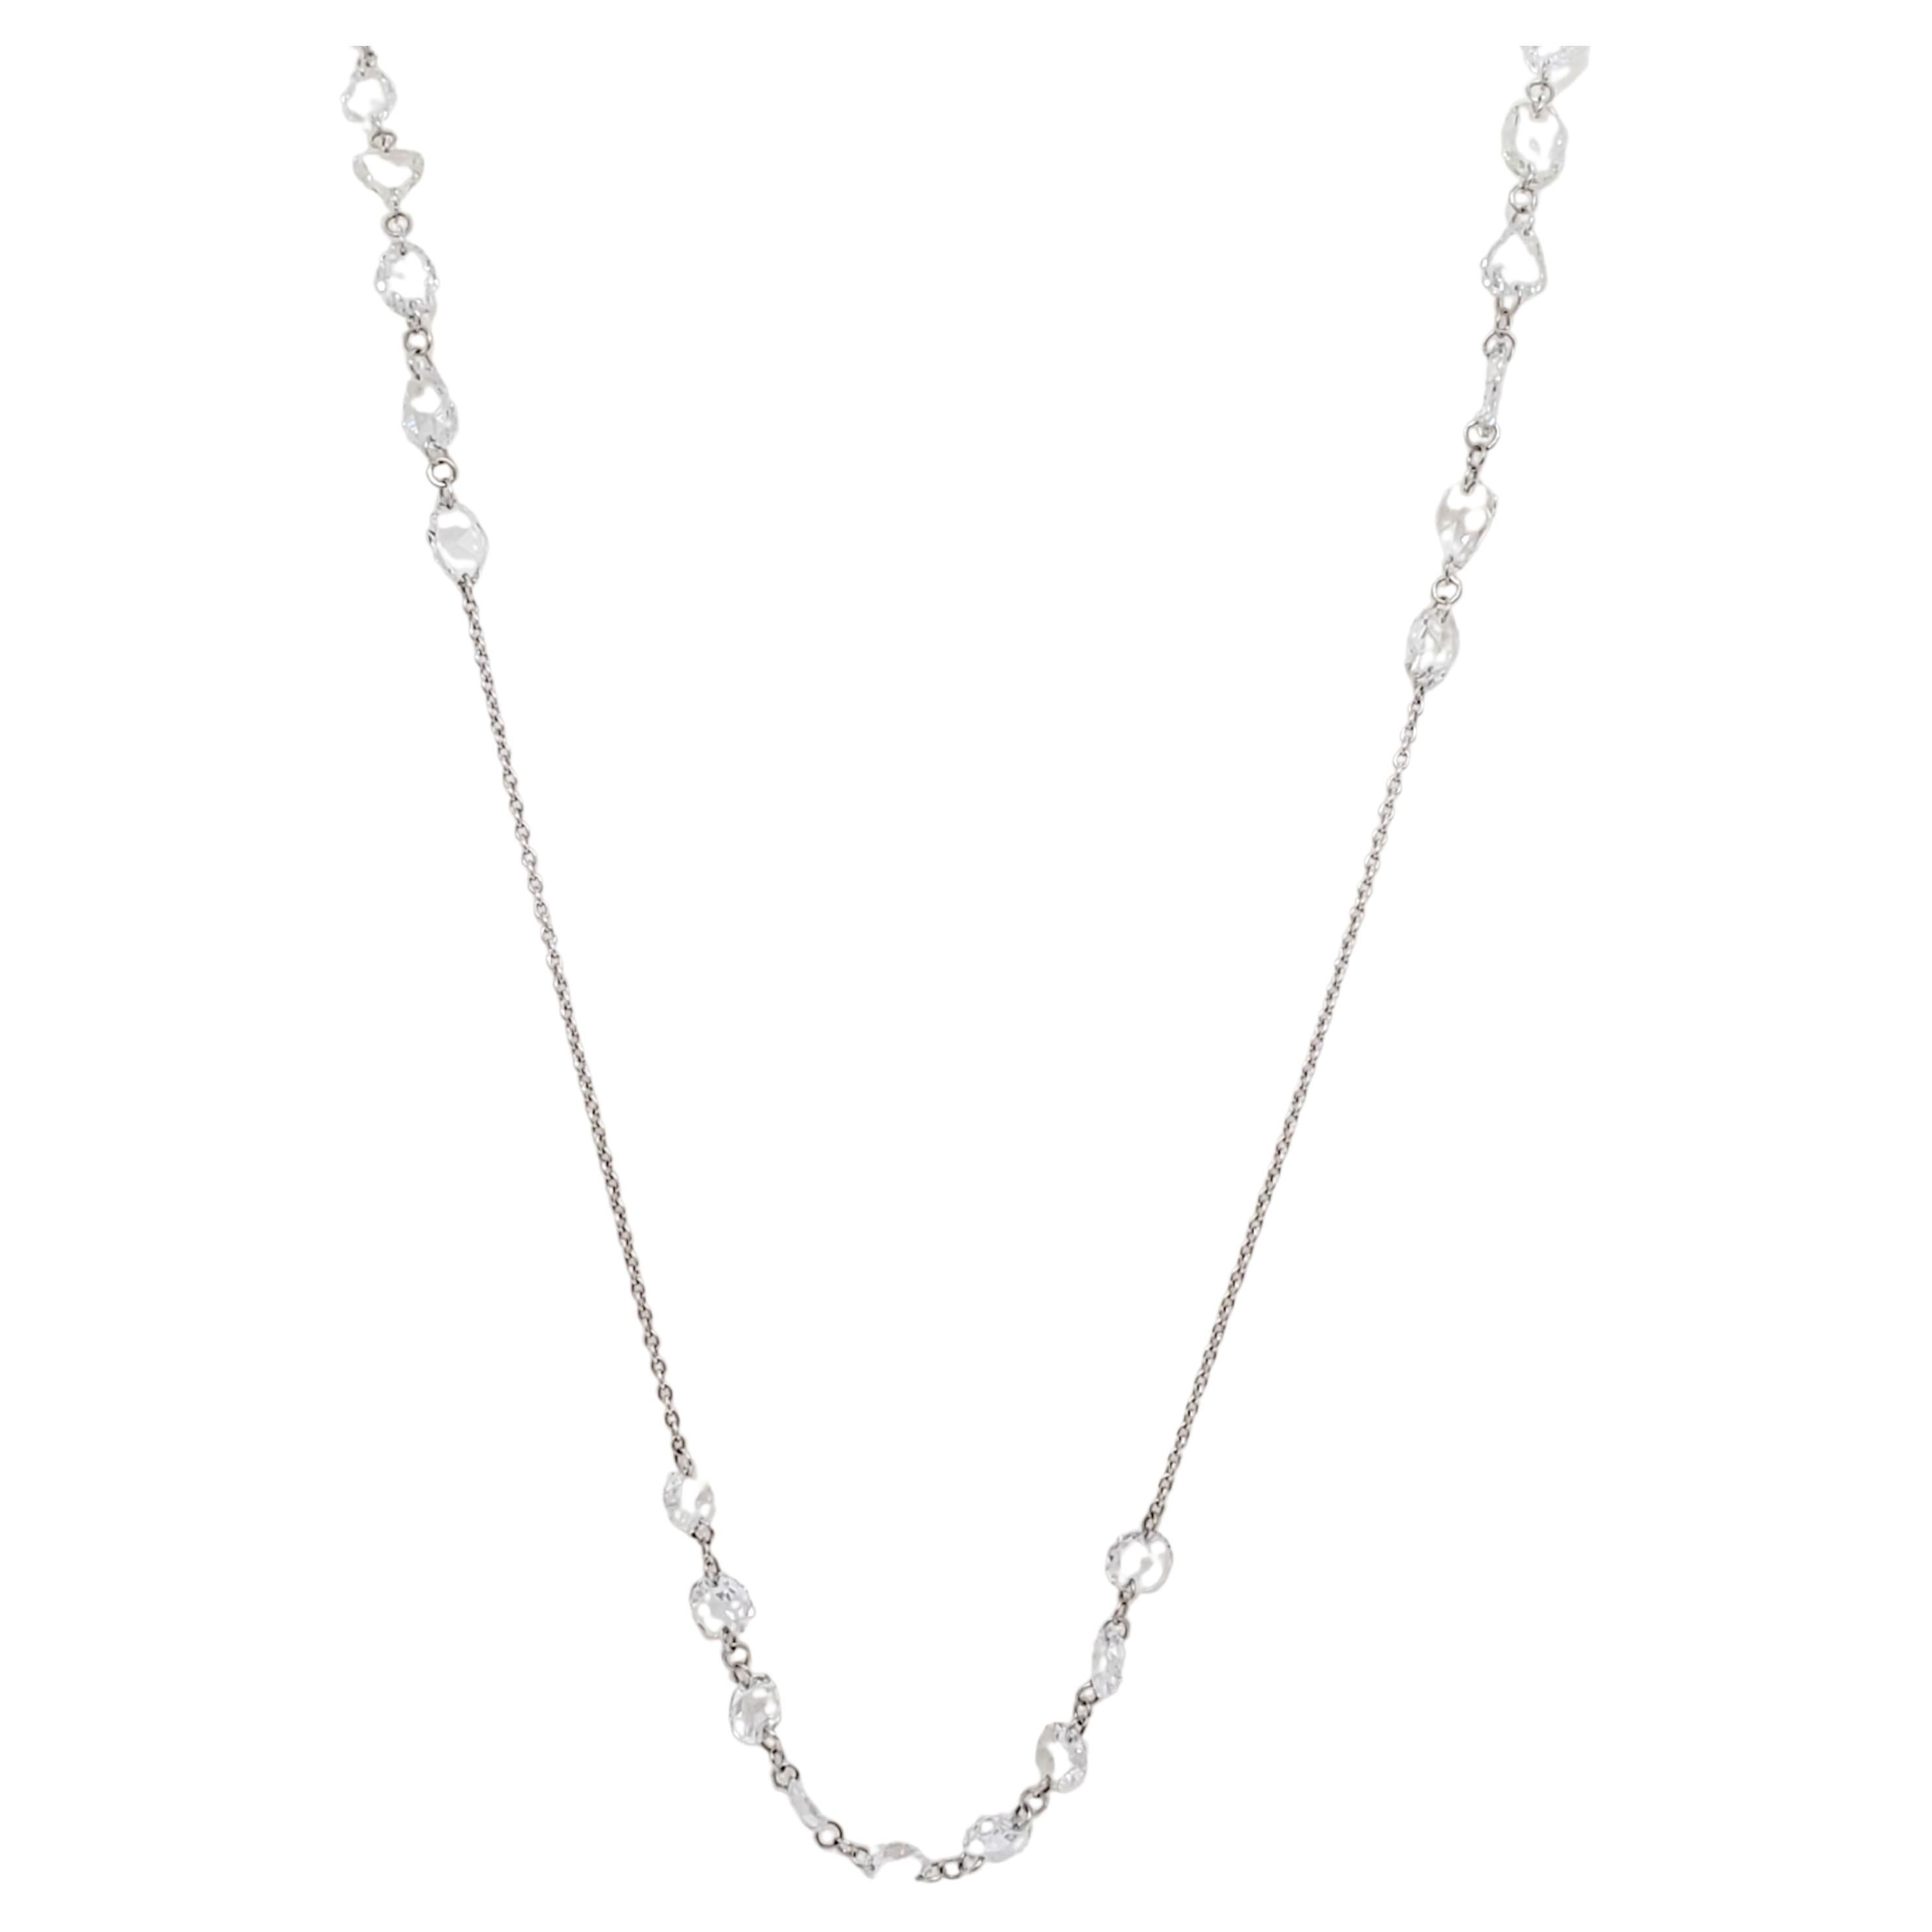 White Diamond Rose Cut Necklace in 18k White Gold